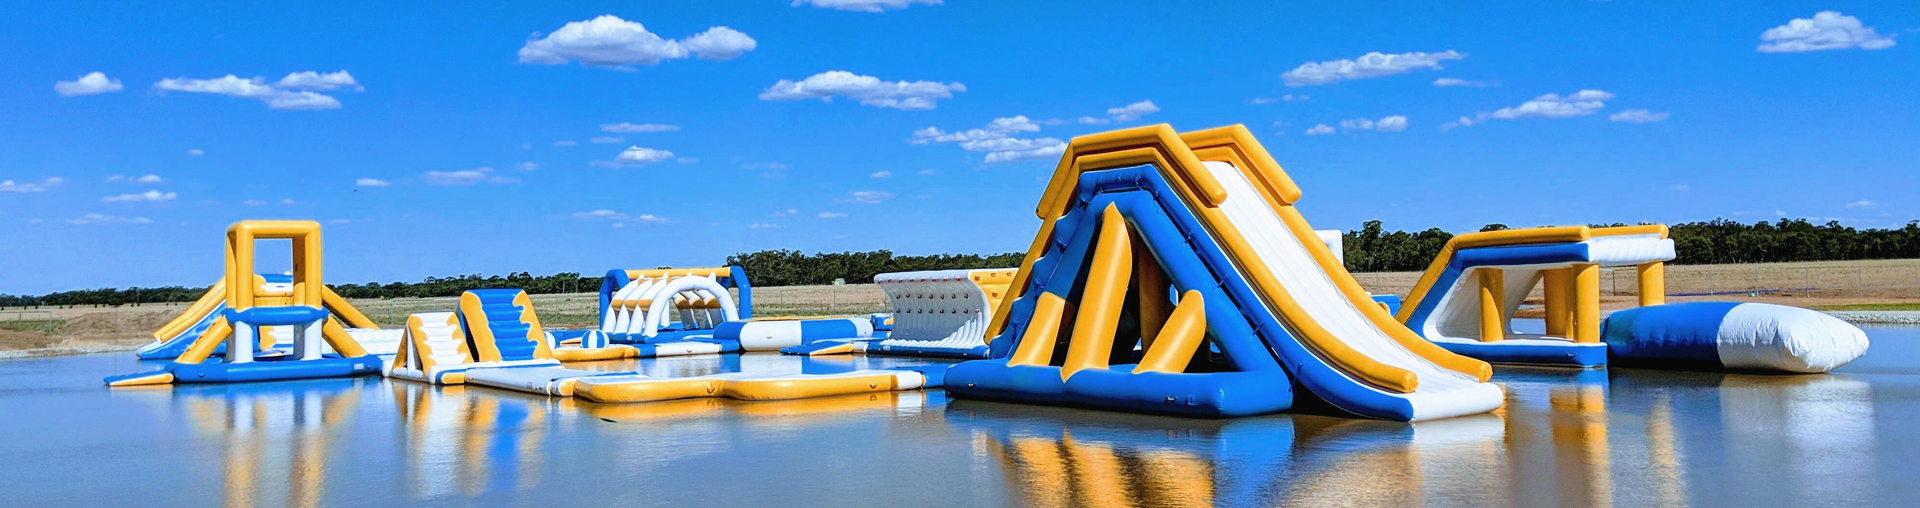 Best Water Park Project & Backyard Water Inflatables ...